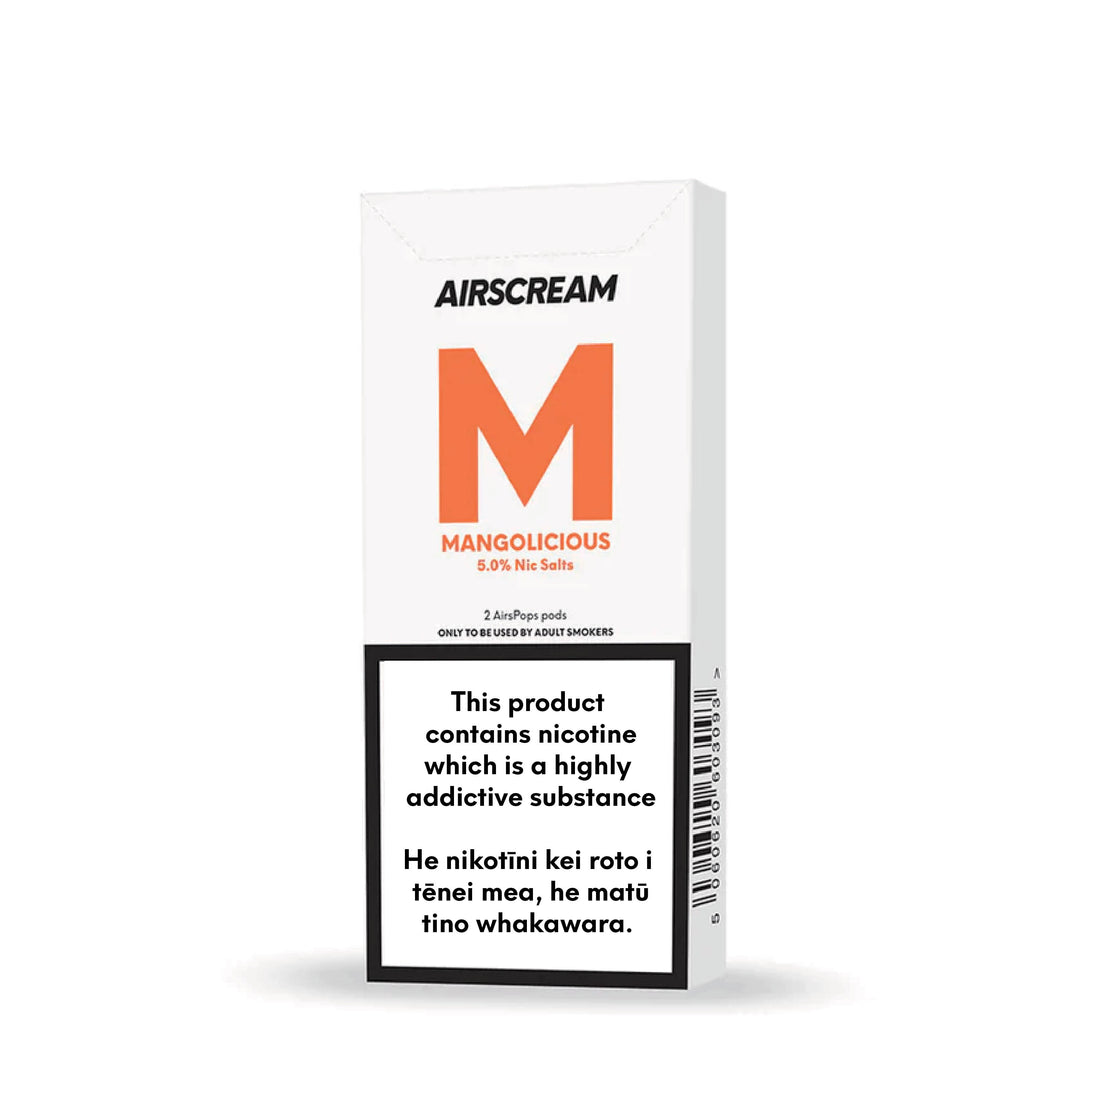 Mangolicious - AIRSCREAM AirsPops 2 Pods 1.6ML by VapeTrend NZ